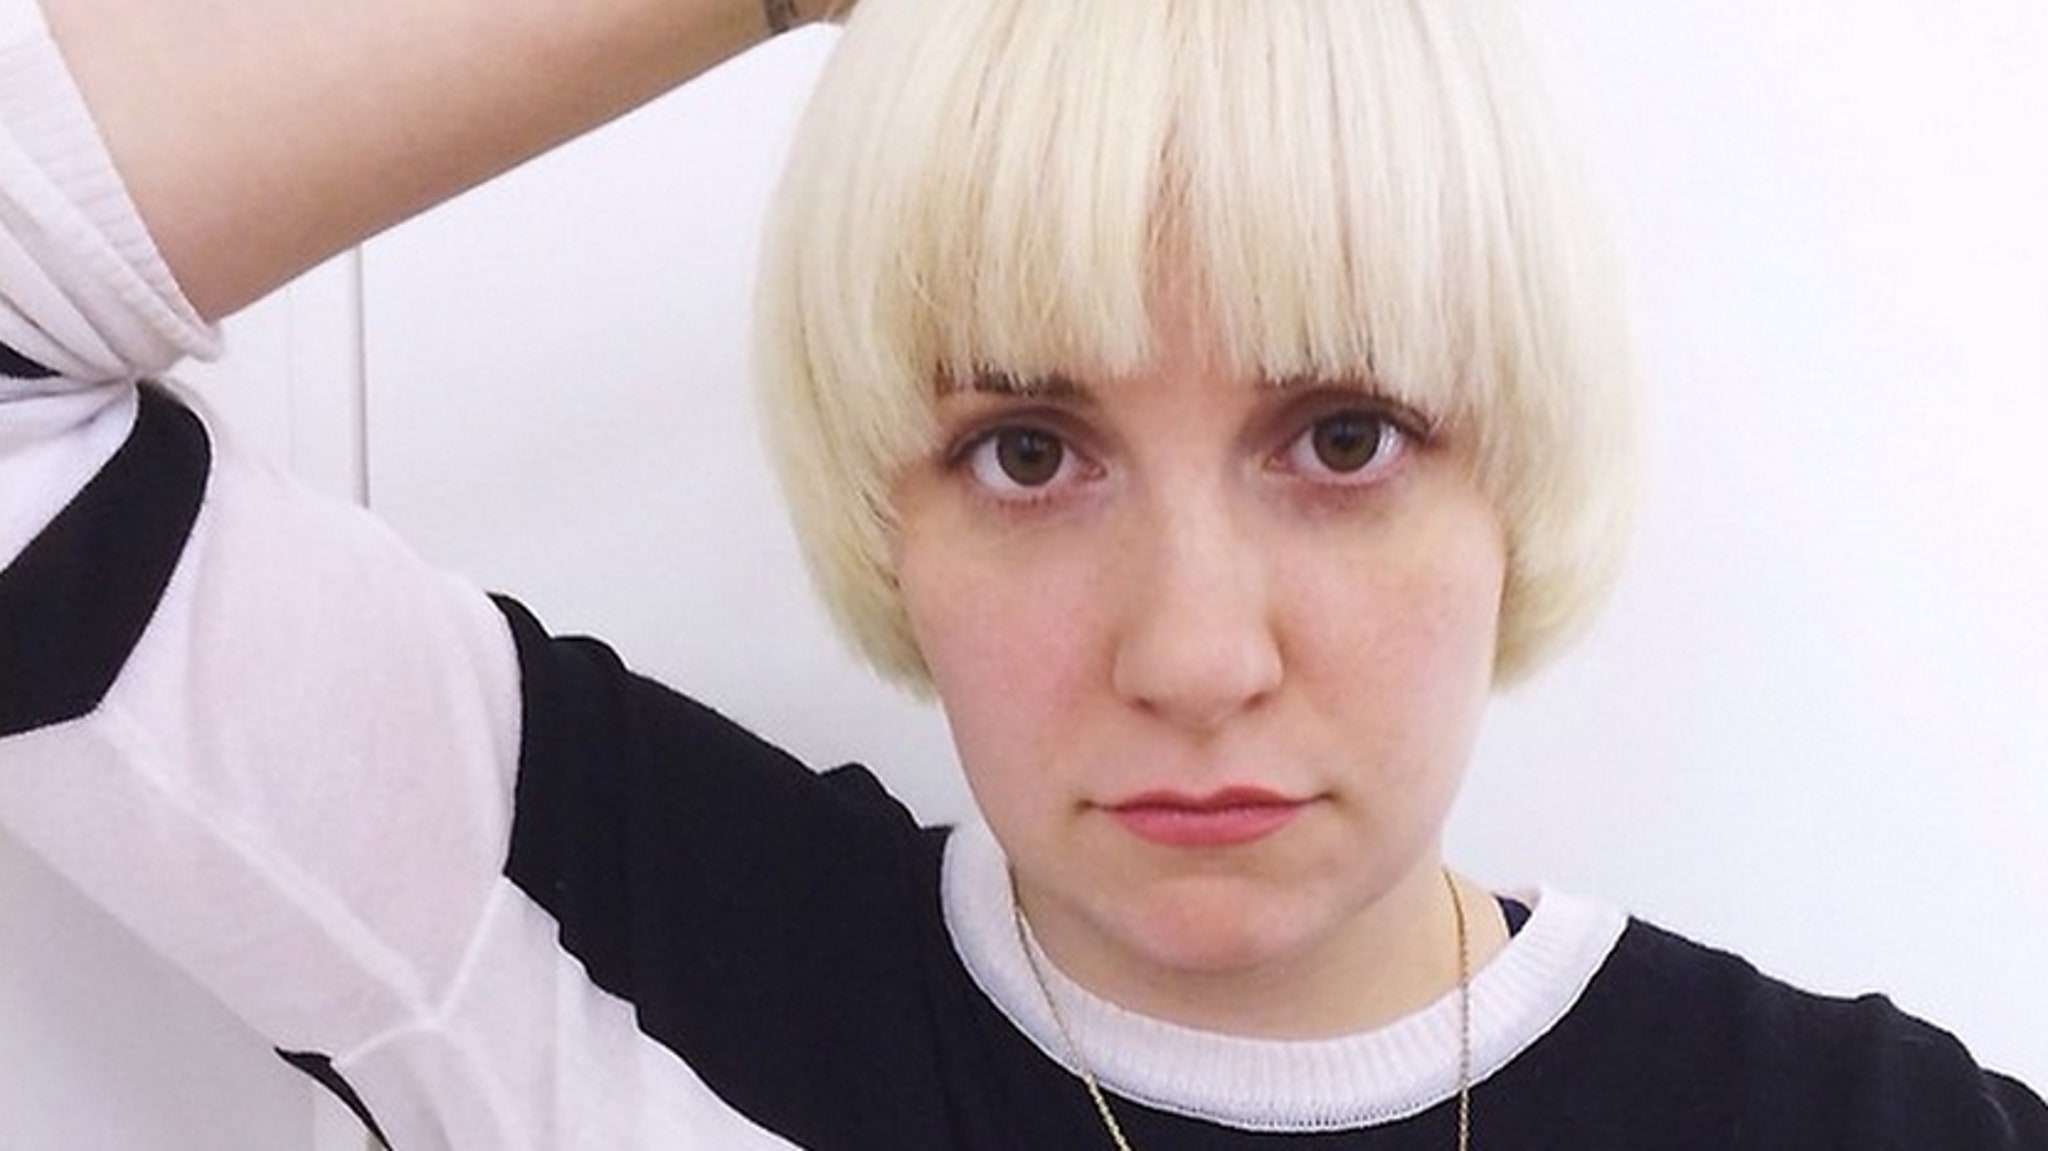 2. How to Get Lena Dunham's Blonde Hair Color at Home - wide 9